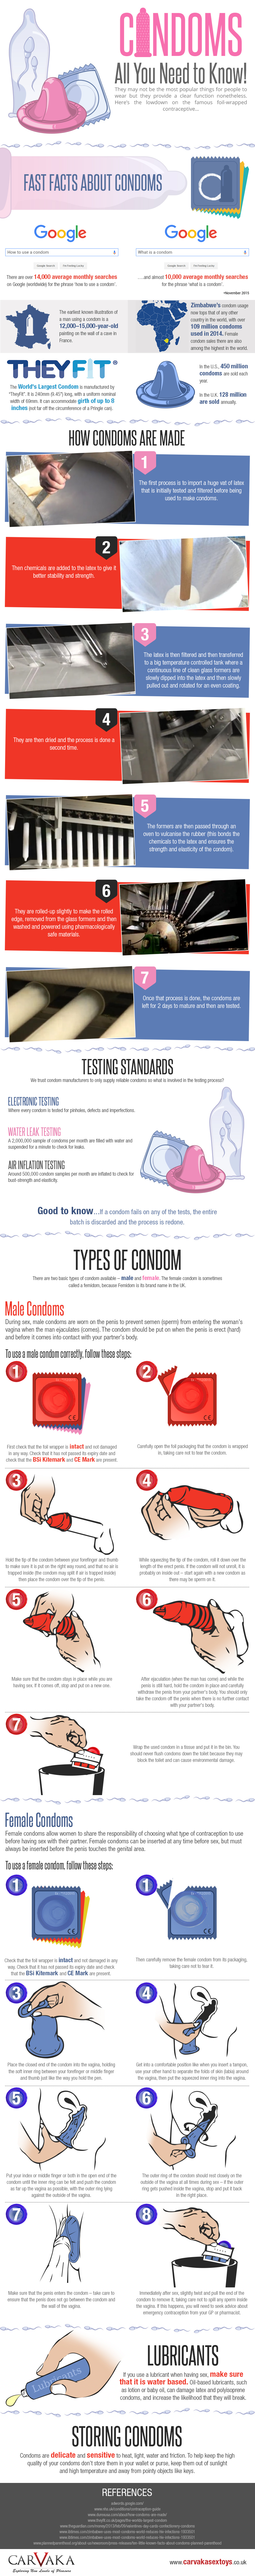 All You Need To Know About Condoms